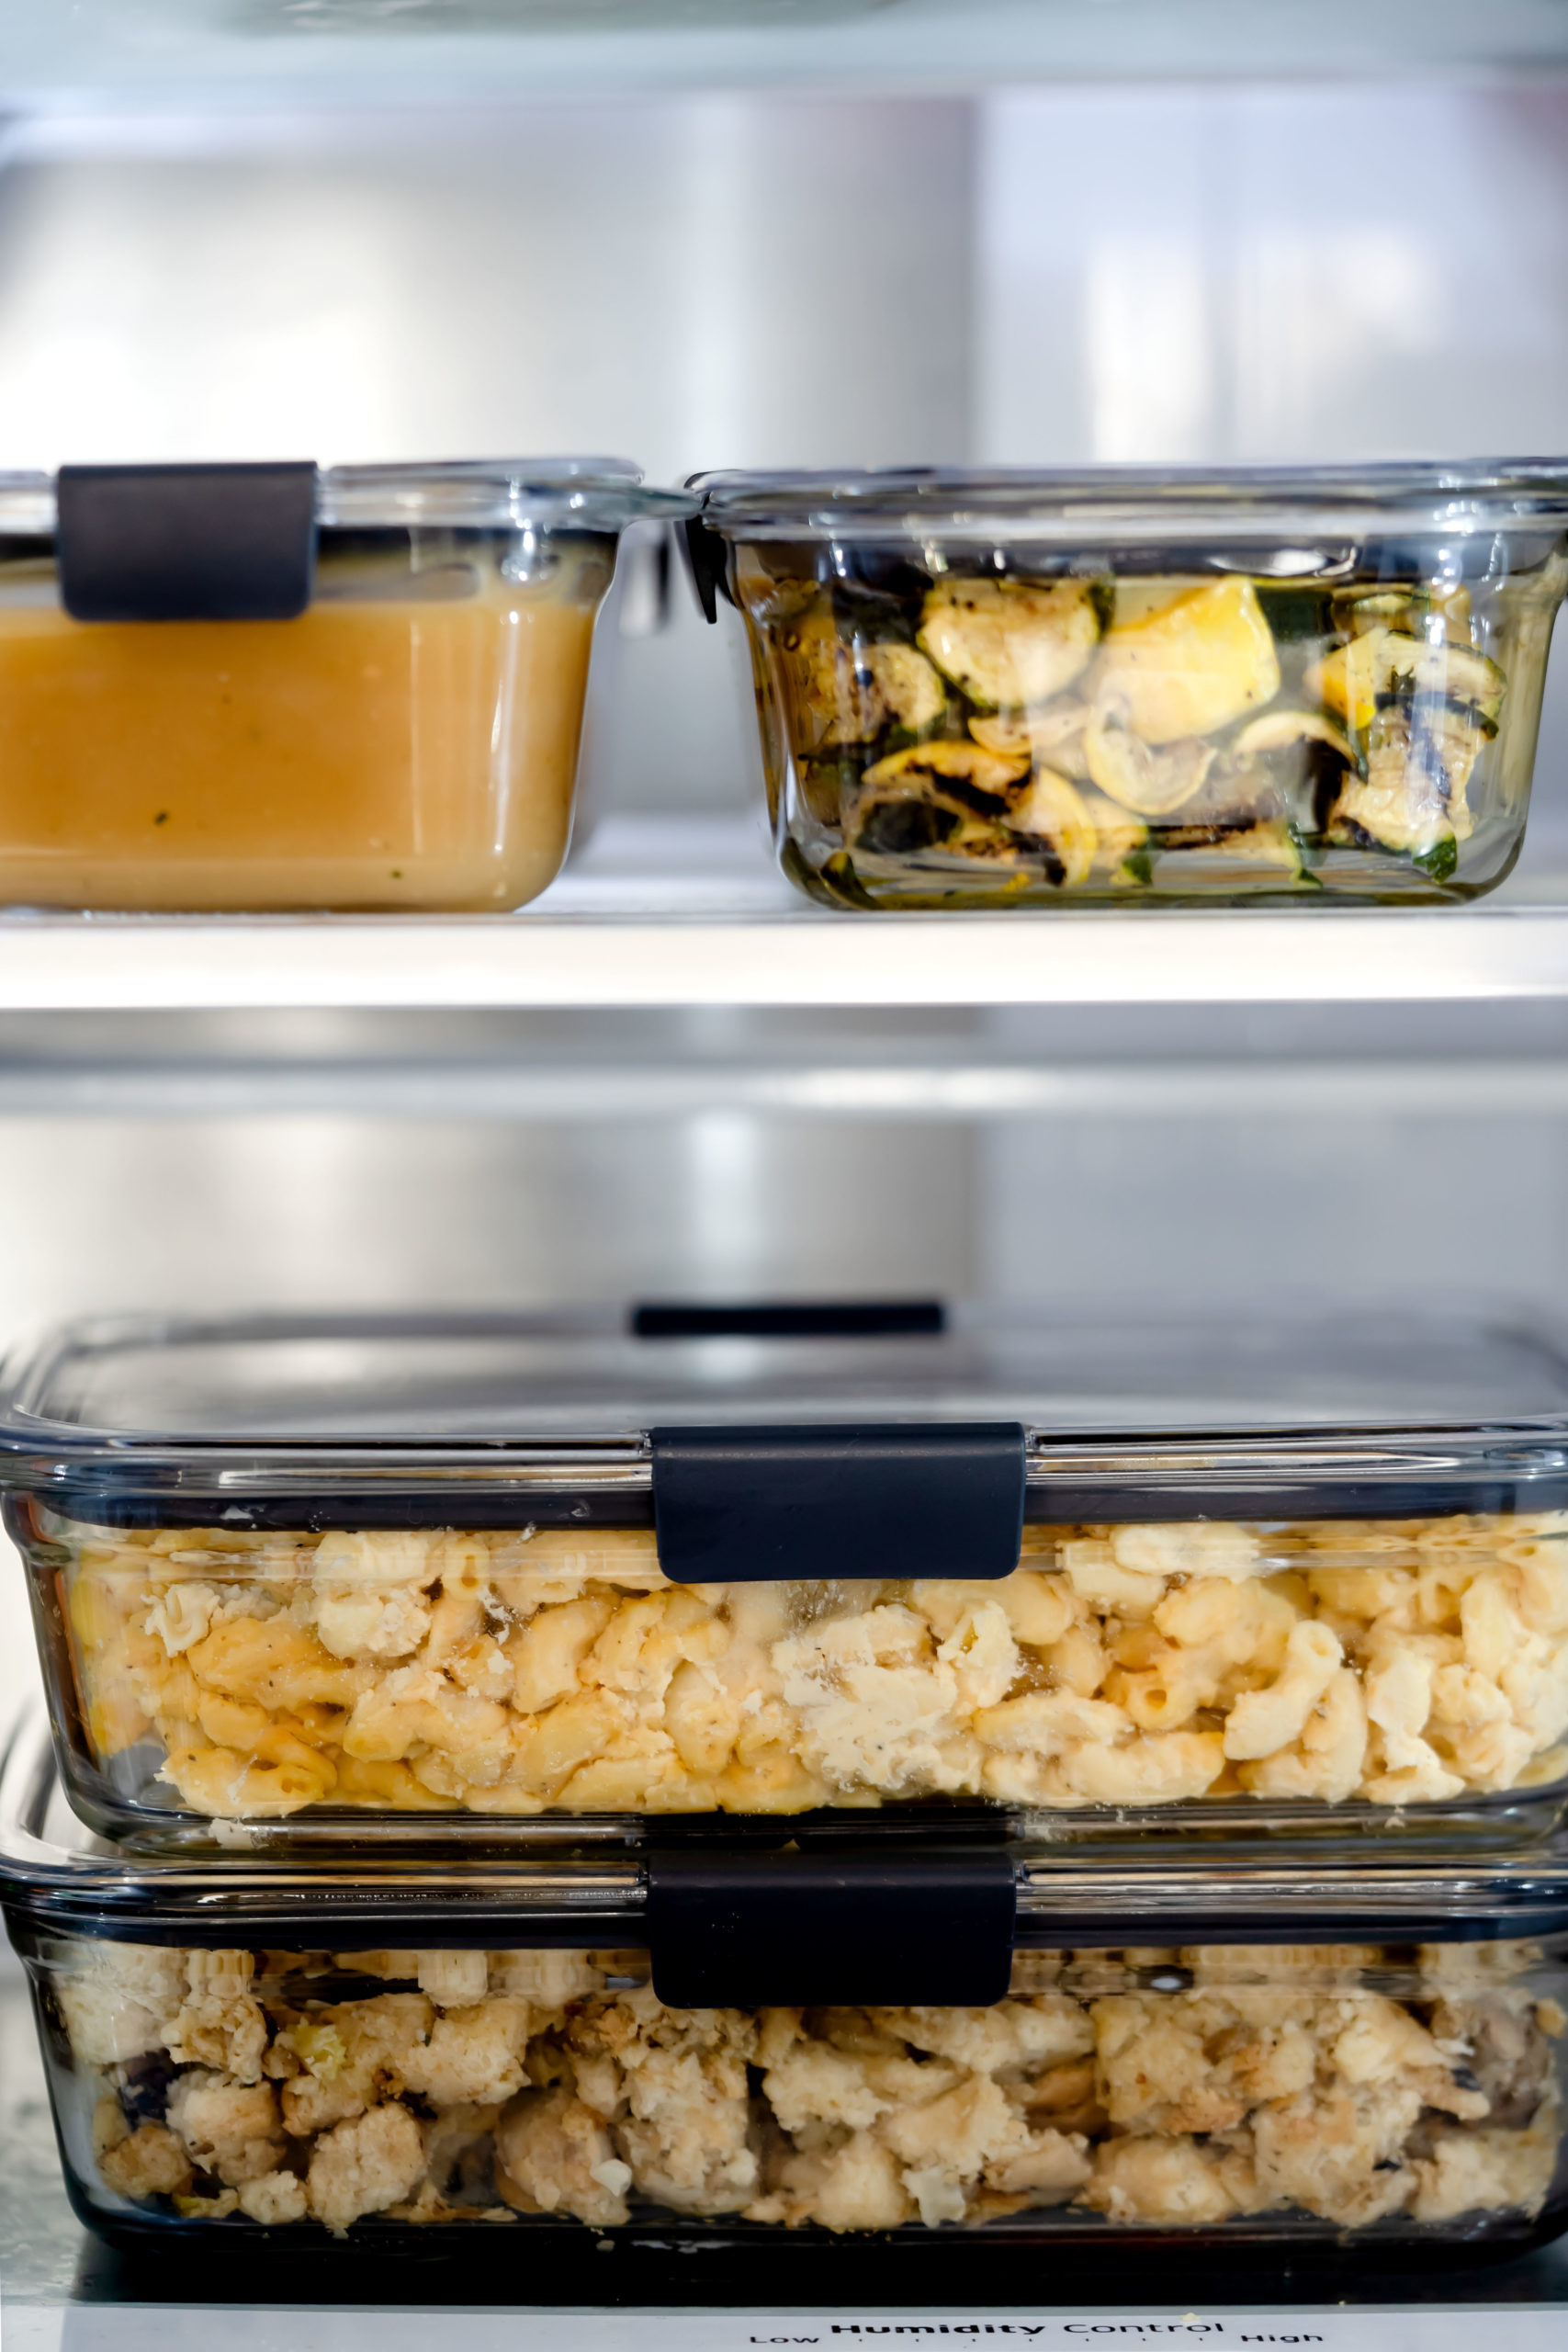 Rubbermaid Brilliance is the clear Thanksgiving meal solution